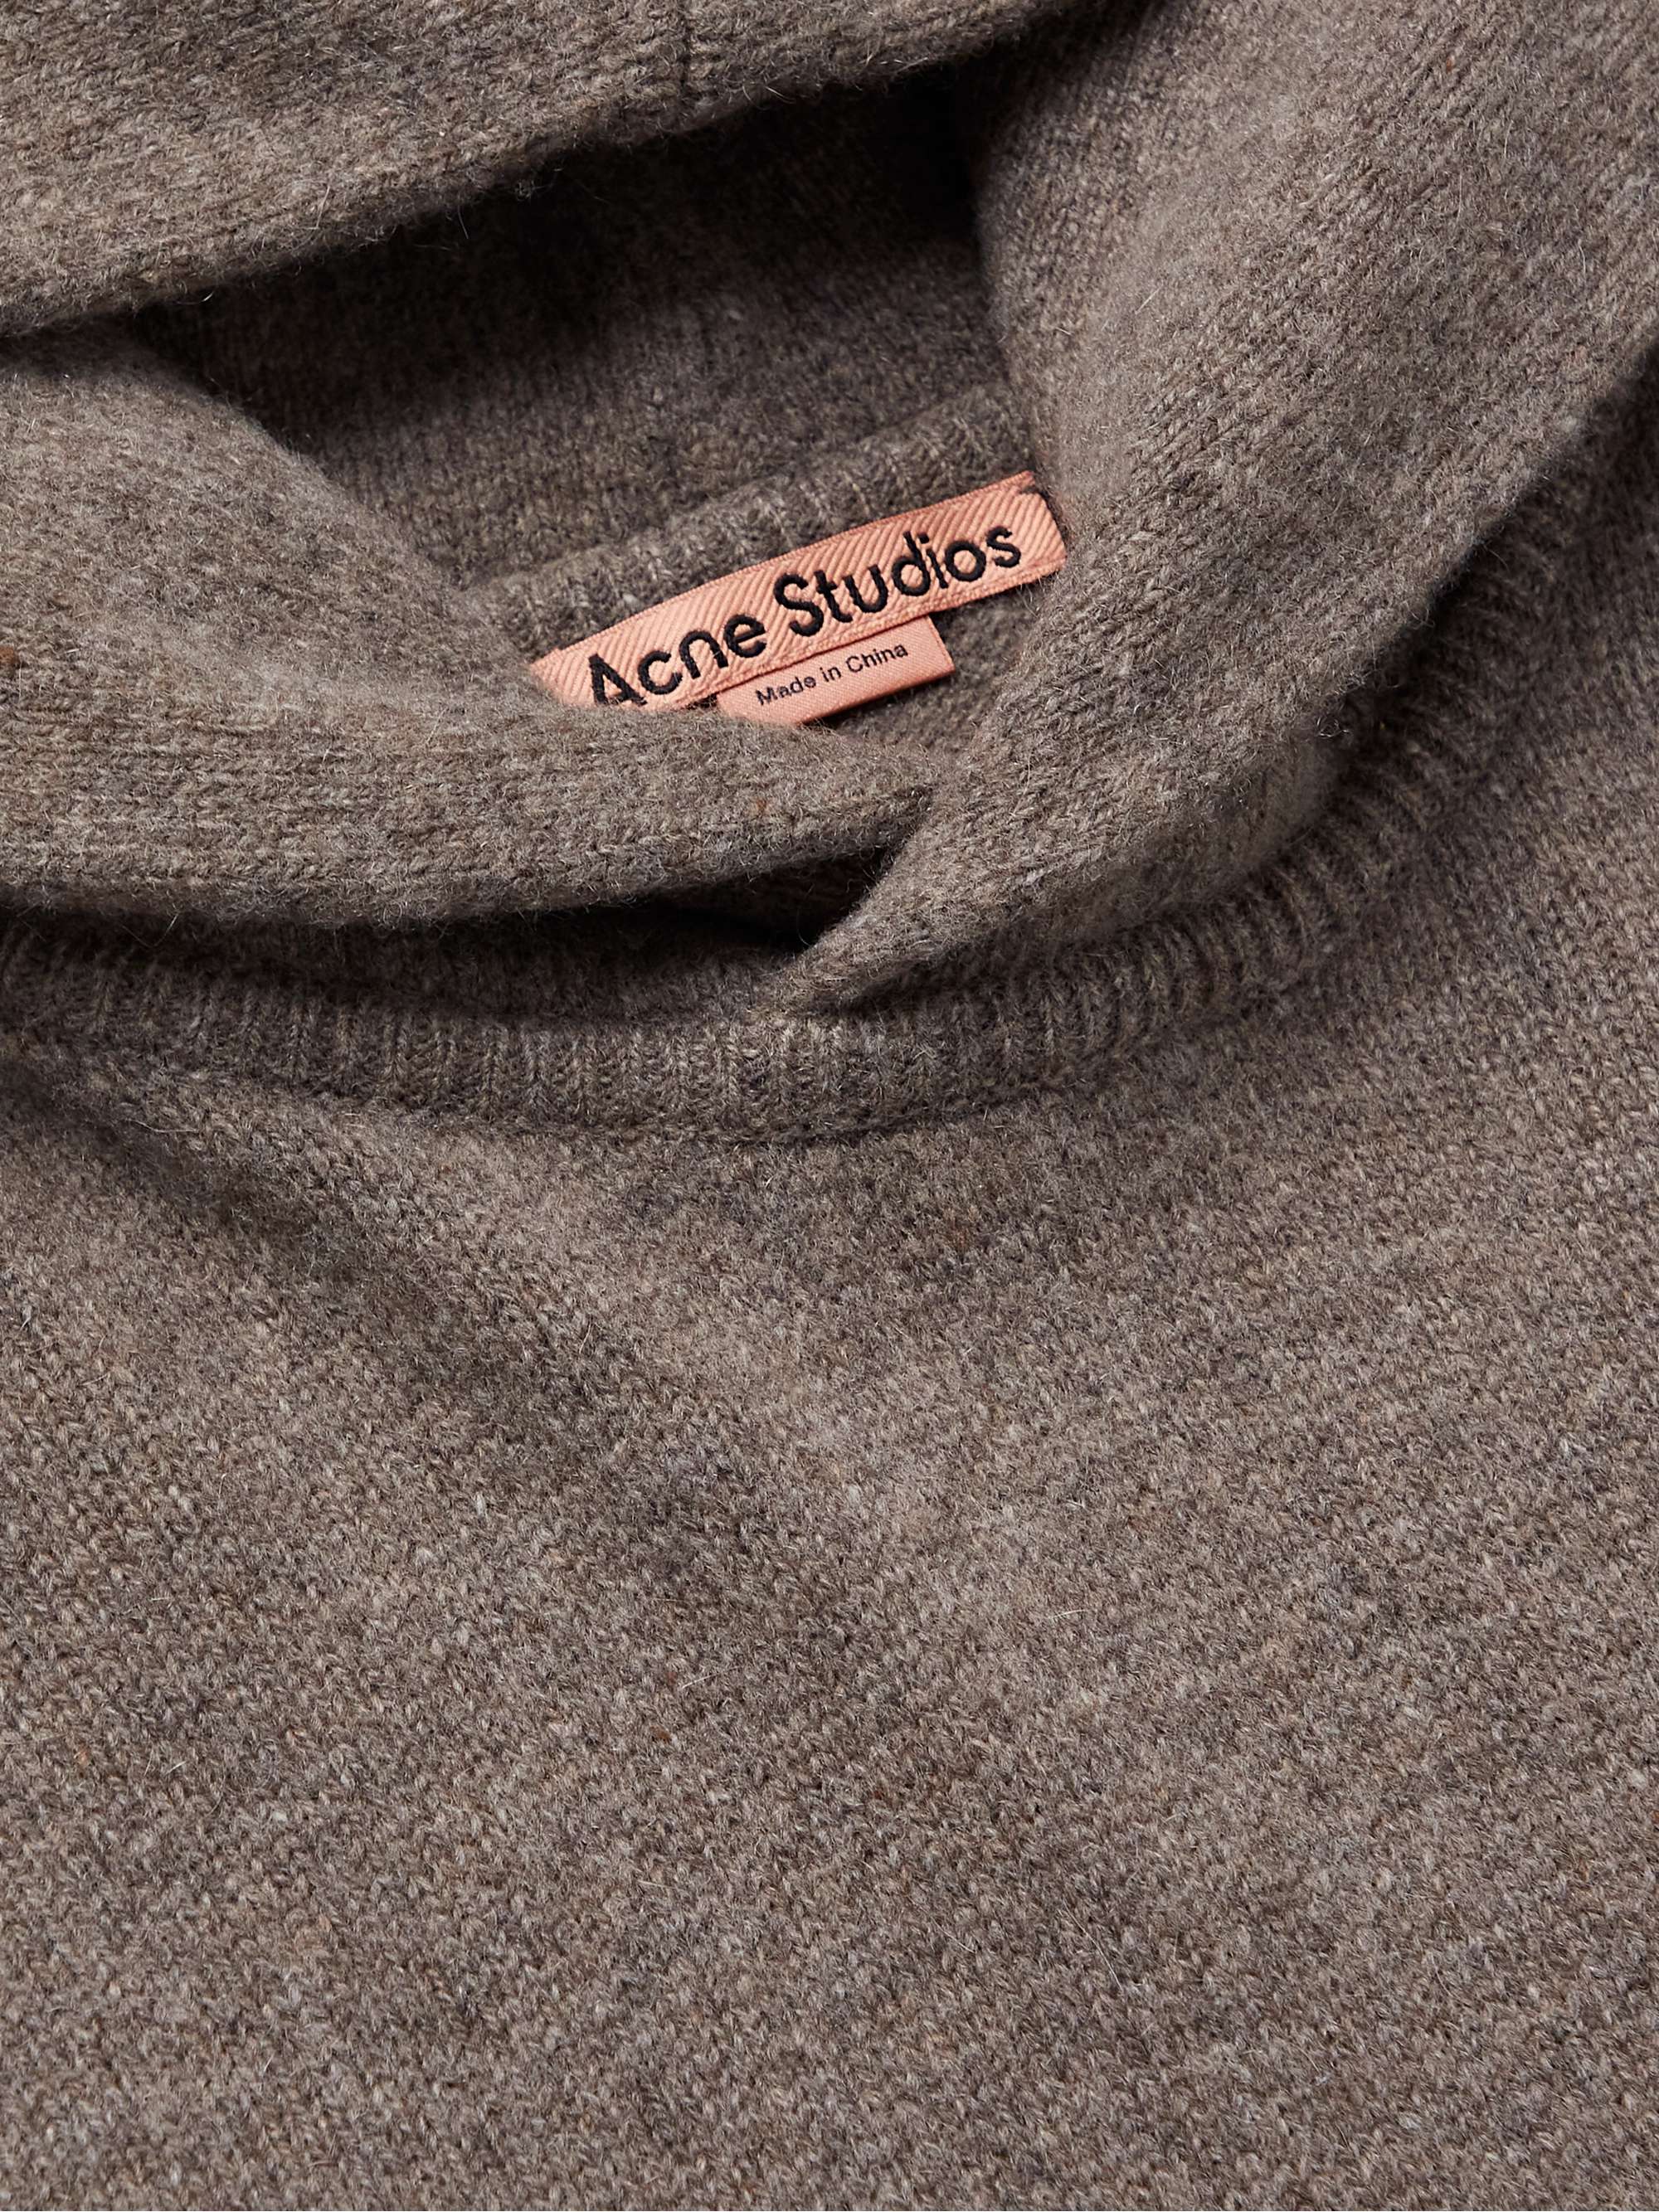 ACNE STUDIOS Kristen Wool and Cashmere-Blend Hoodie